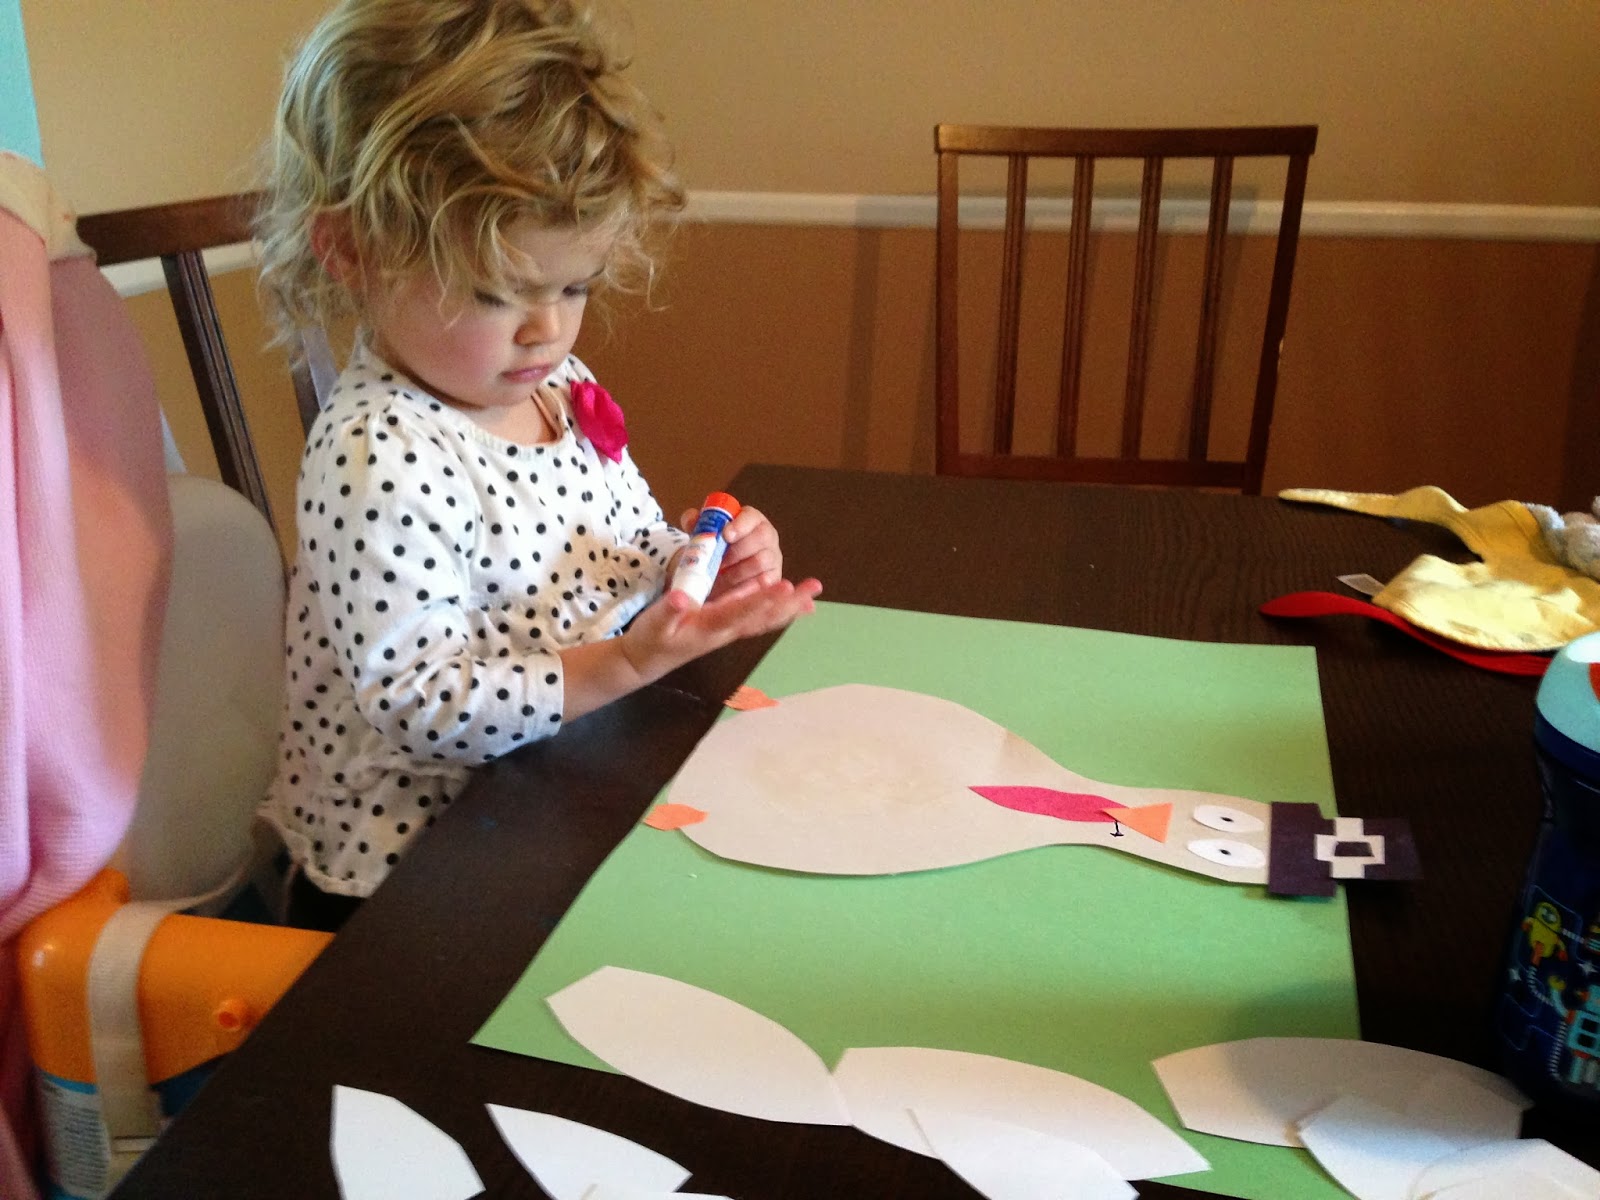 ... It's all construction paper, save the feathers which are card stock